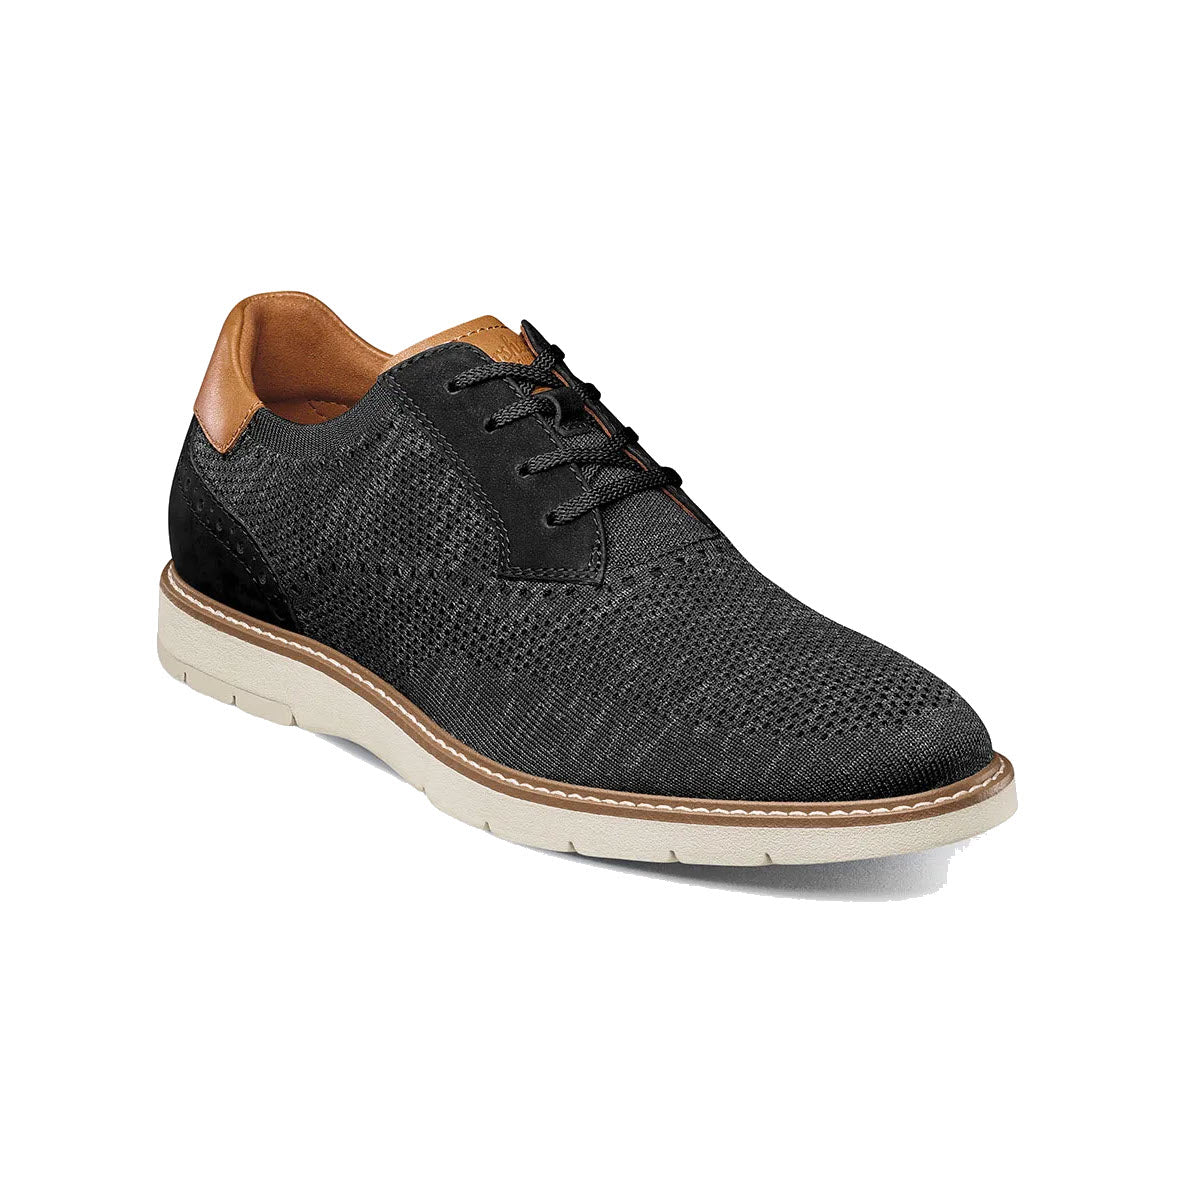 Florsheim Vibe Knit Plain Toe Oxford Black men&#39;s shoe with tan leather lining and a white rubber sole on a white background.